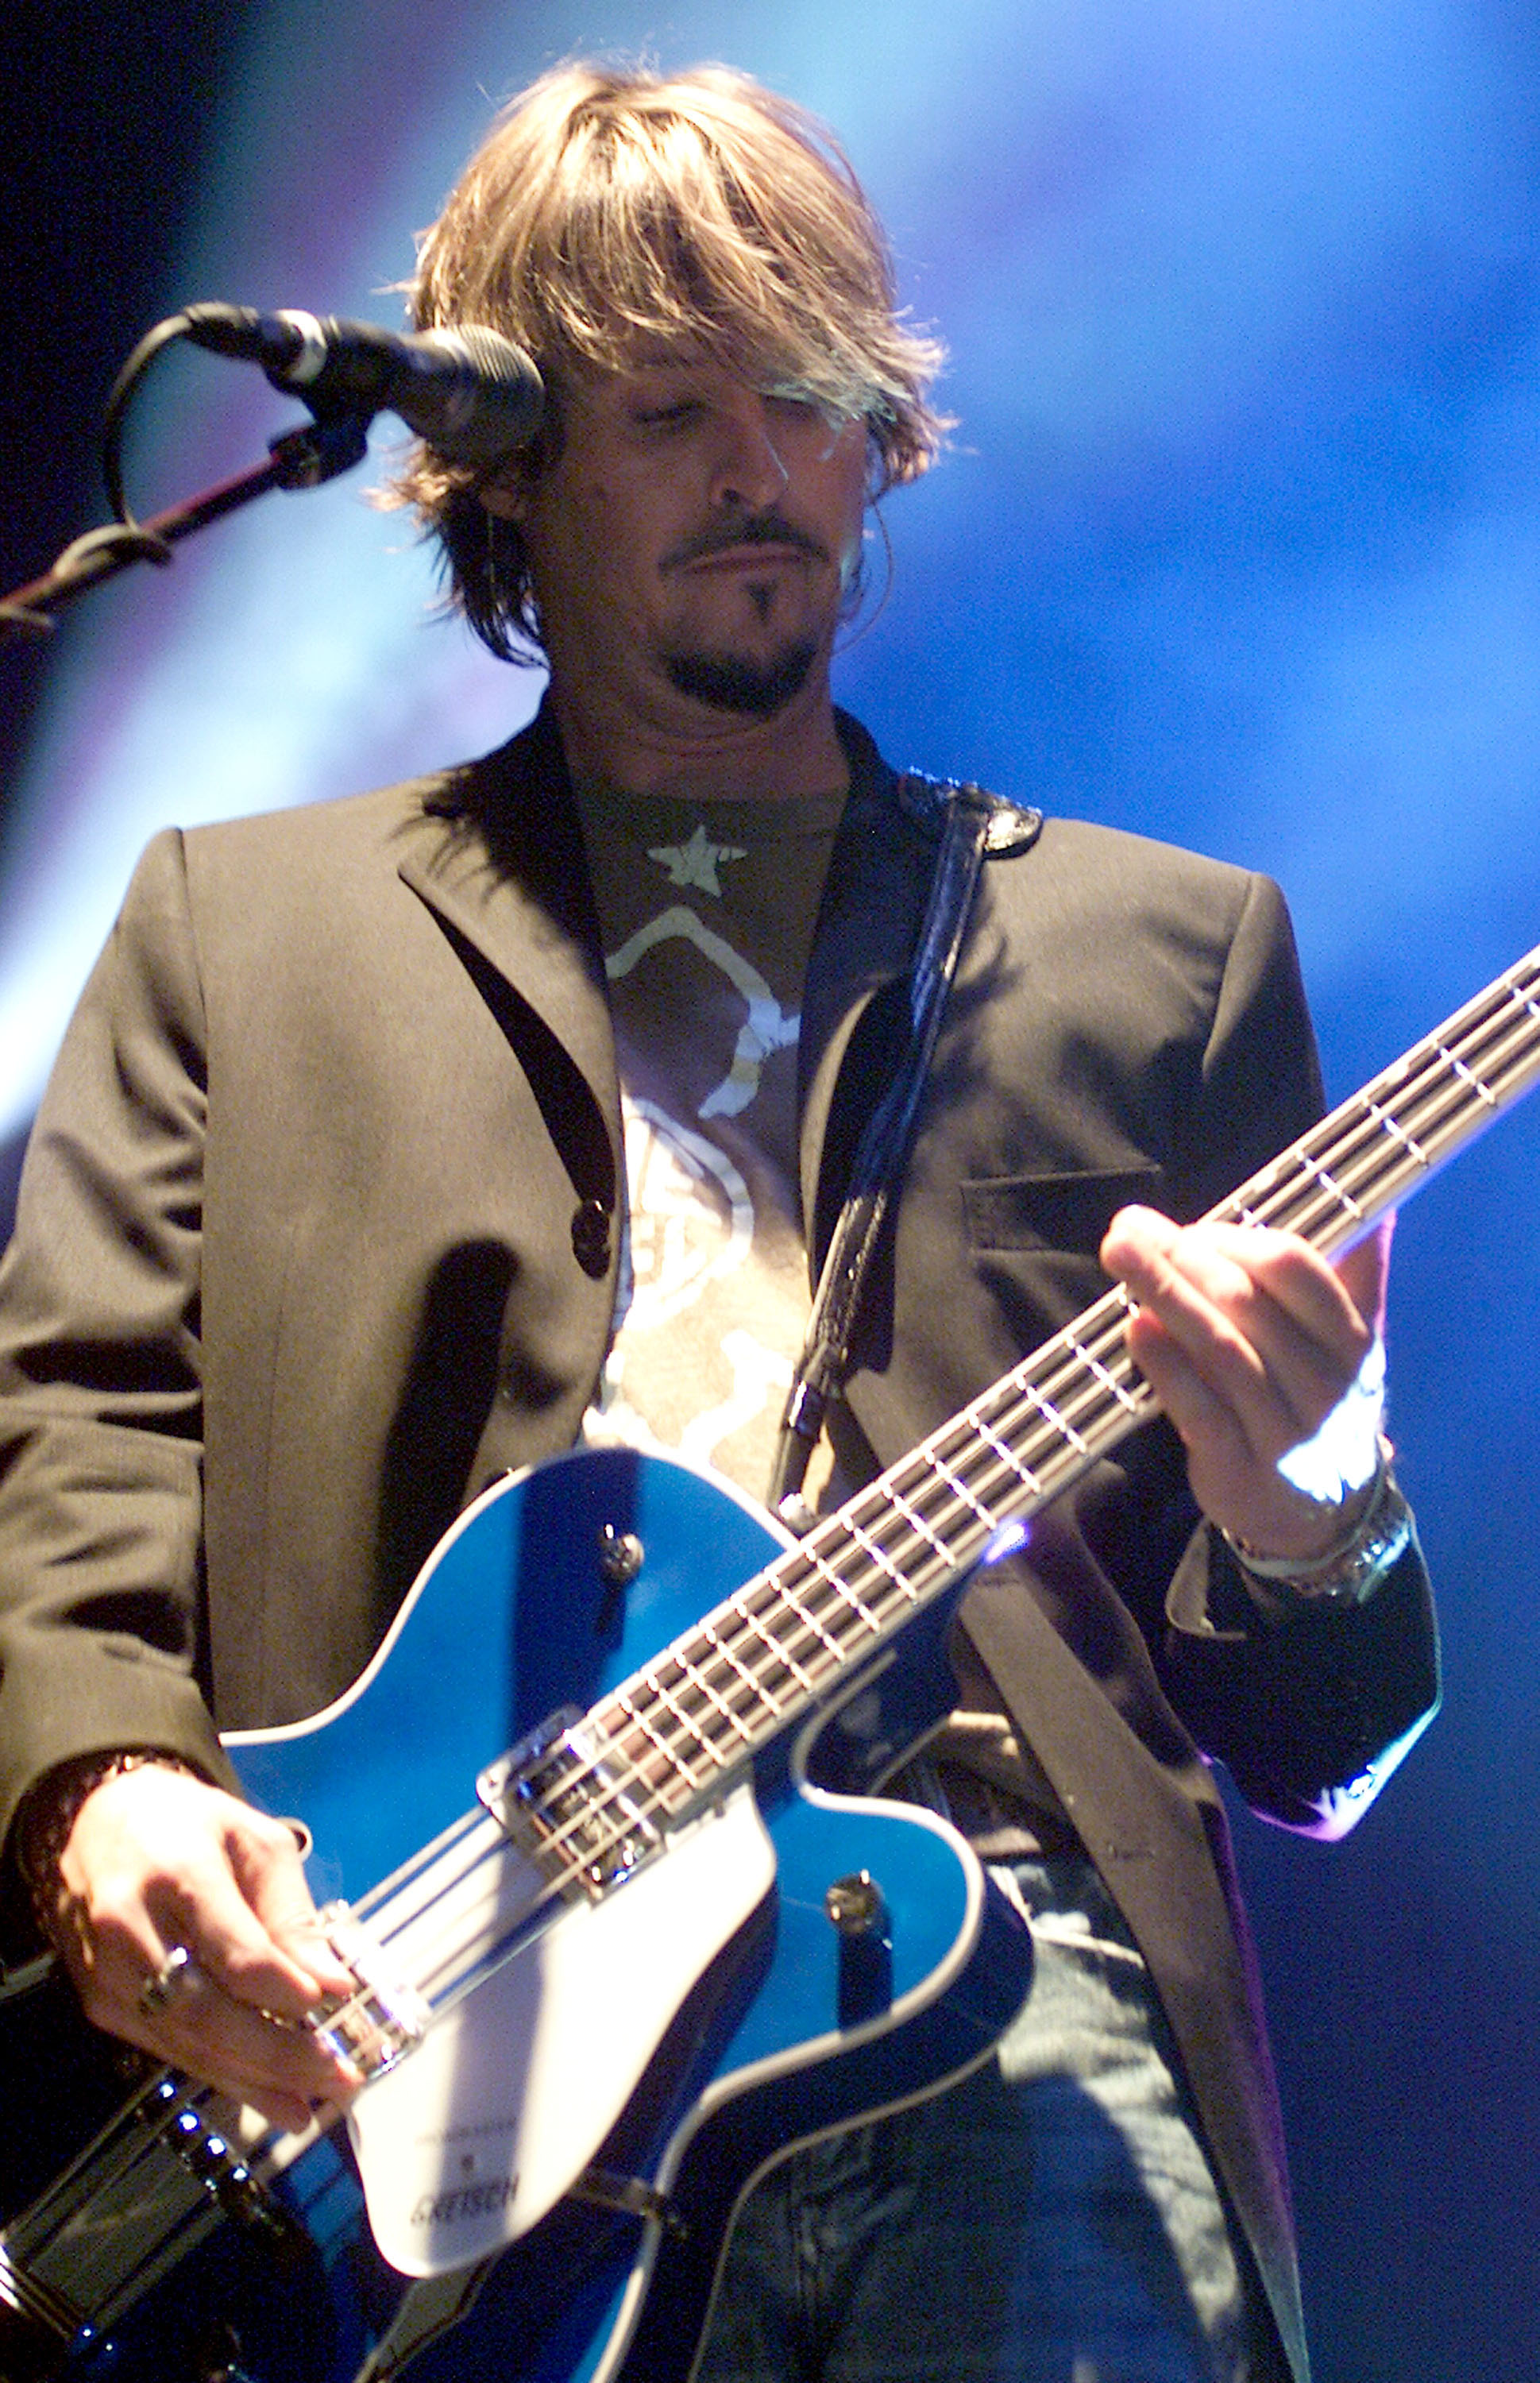 Charlie Colin from the rock band Train stands on stage wearing a suit jacket and playing a blue bass guitar